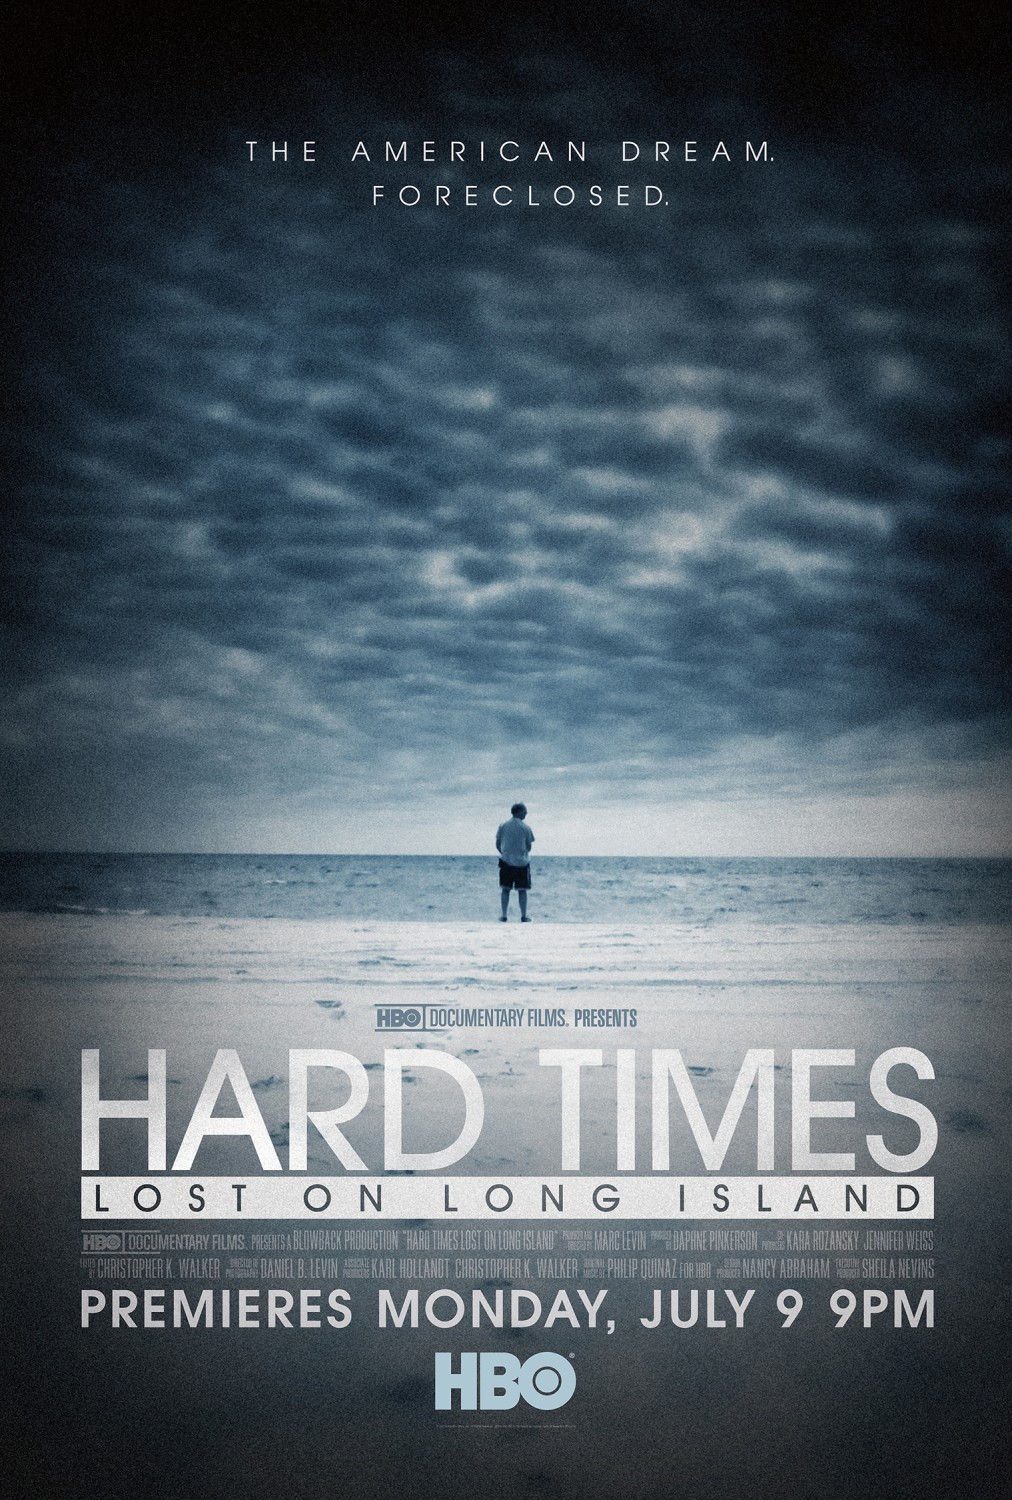 Extra Large TV Poster Image for Hard Times: Lost on Long Island 